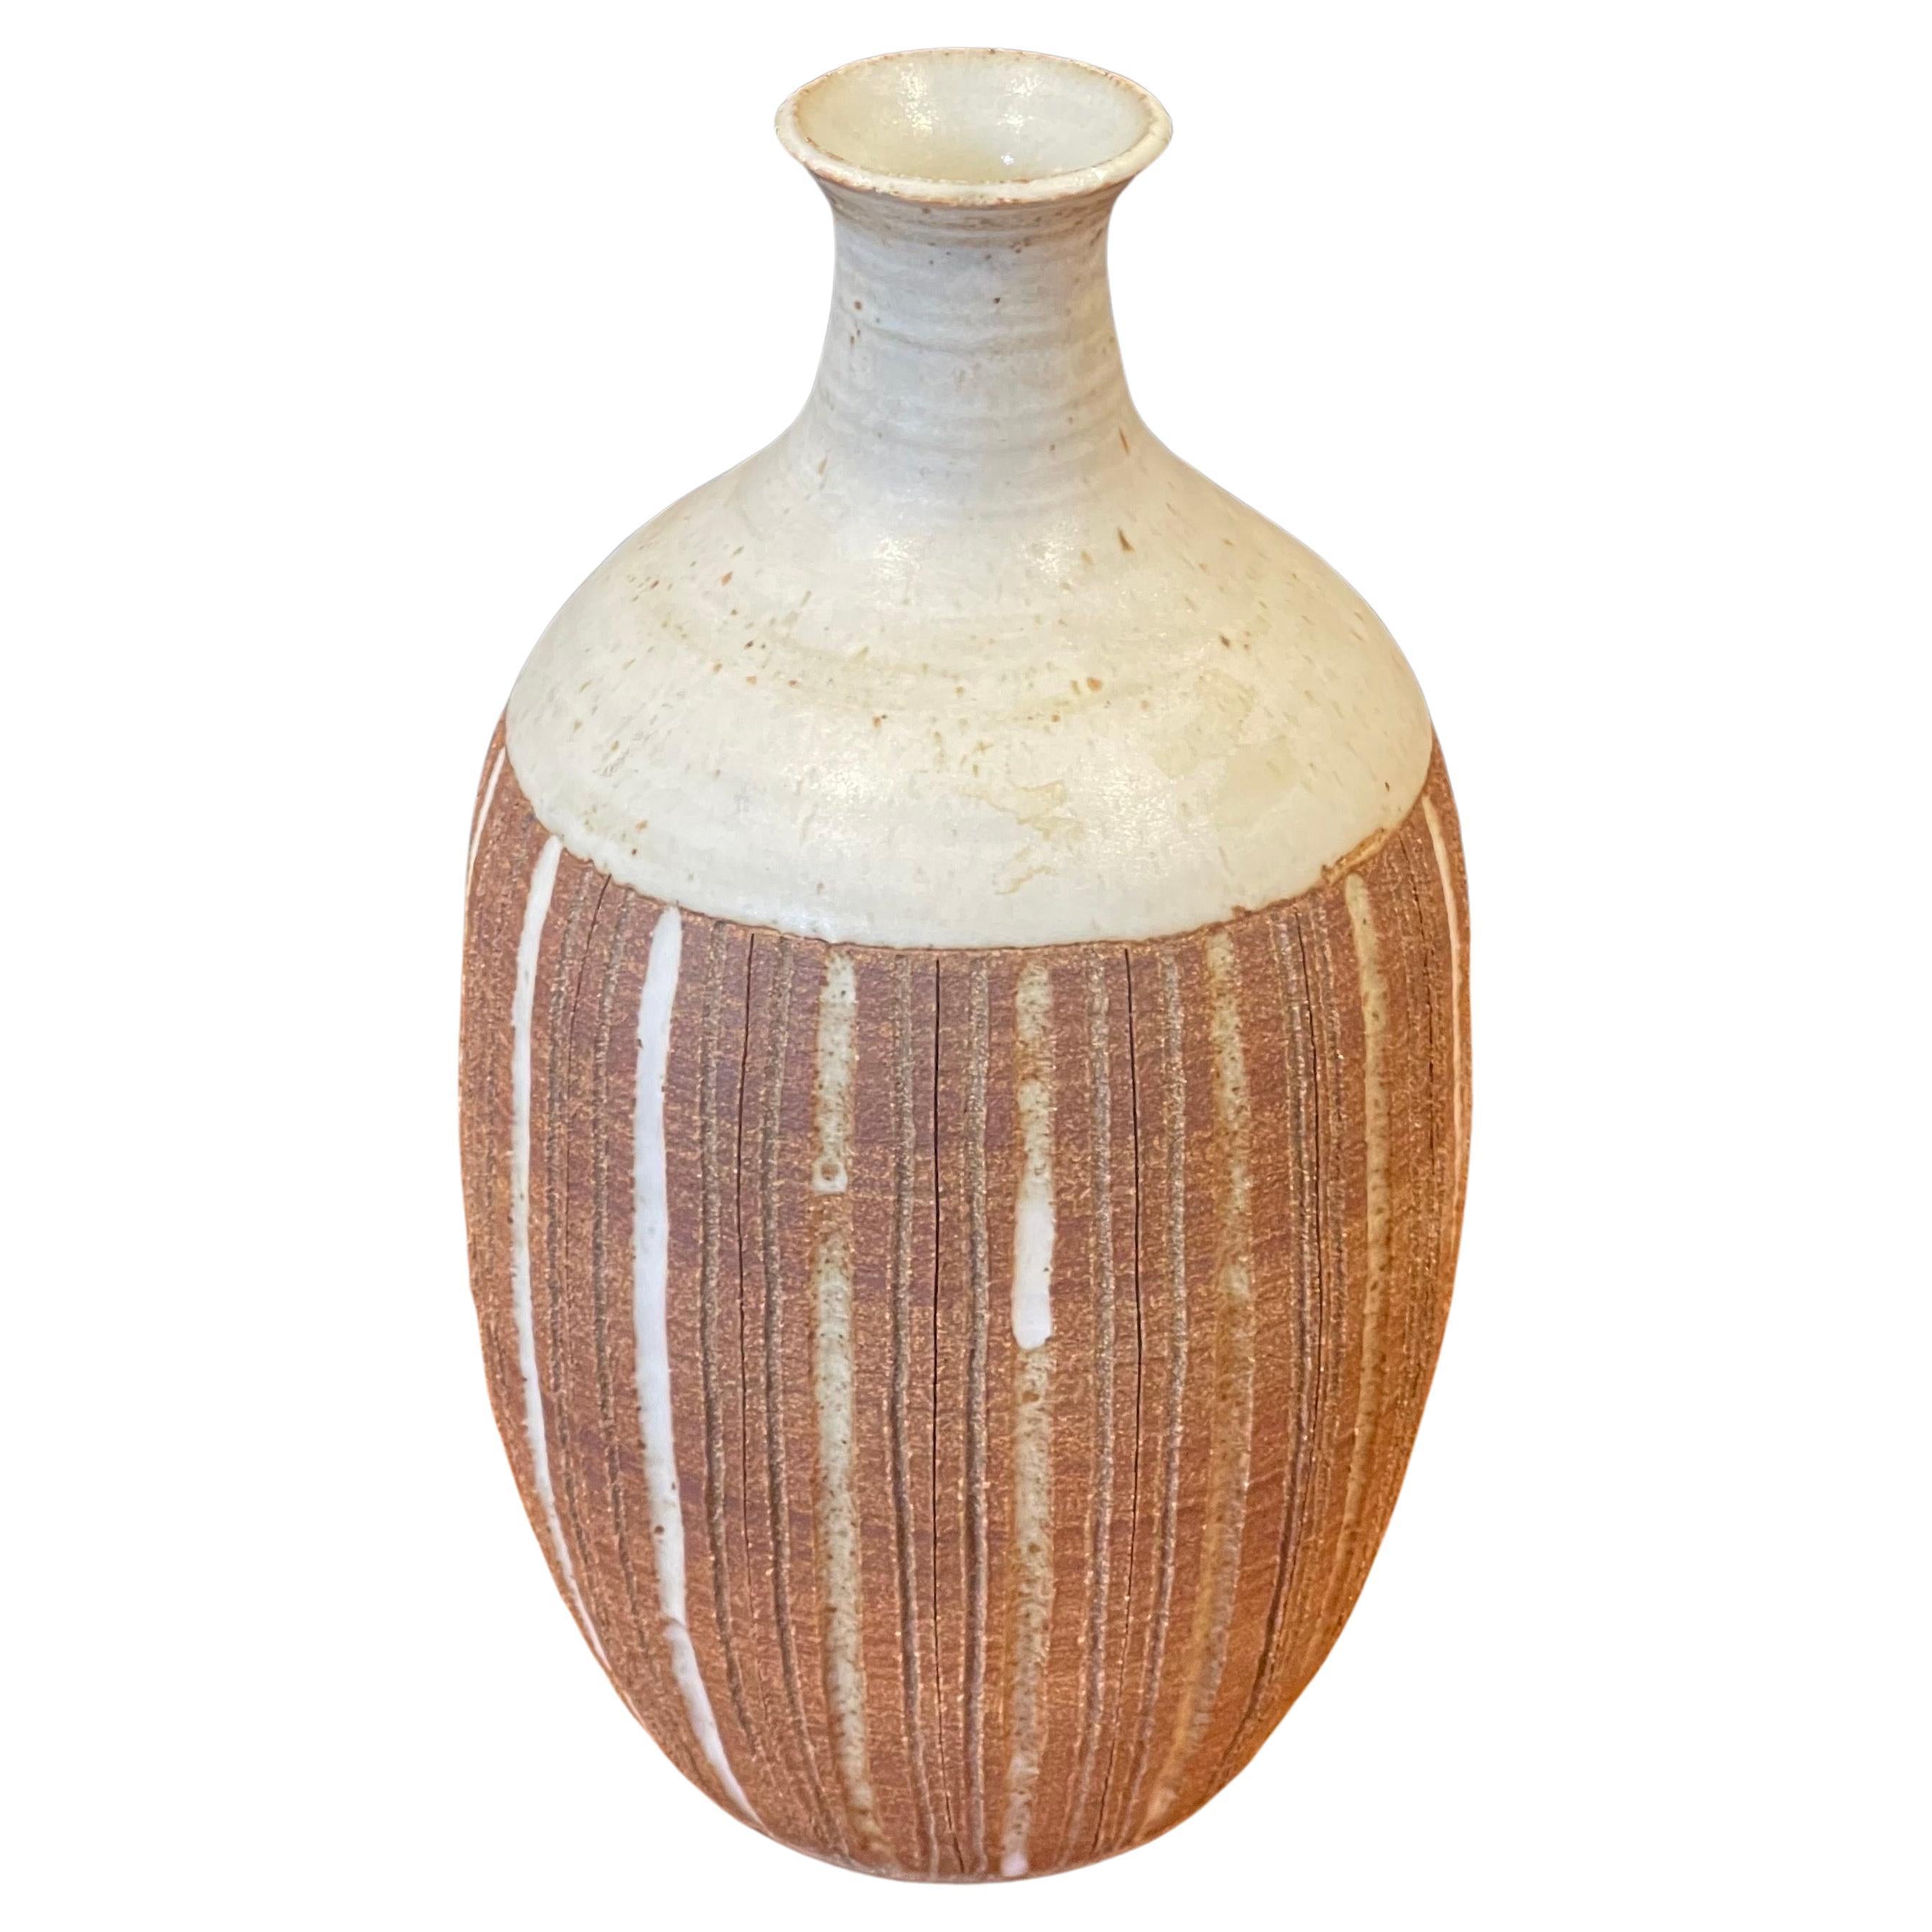 A very nice California studio pottery stoneware vase with beautiful tan and brown earth tones by San Diego artist Barbara Moorehead, circa 1970s. The vessel has wonderful design, look and form and measures 5.5